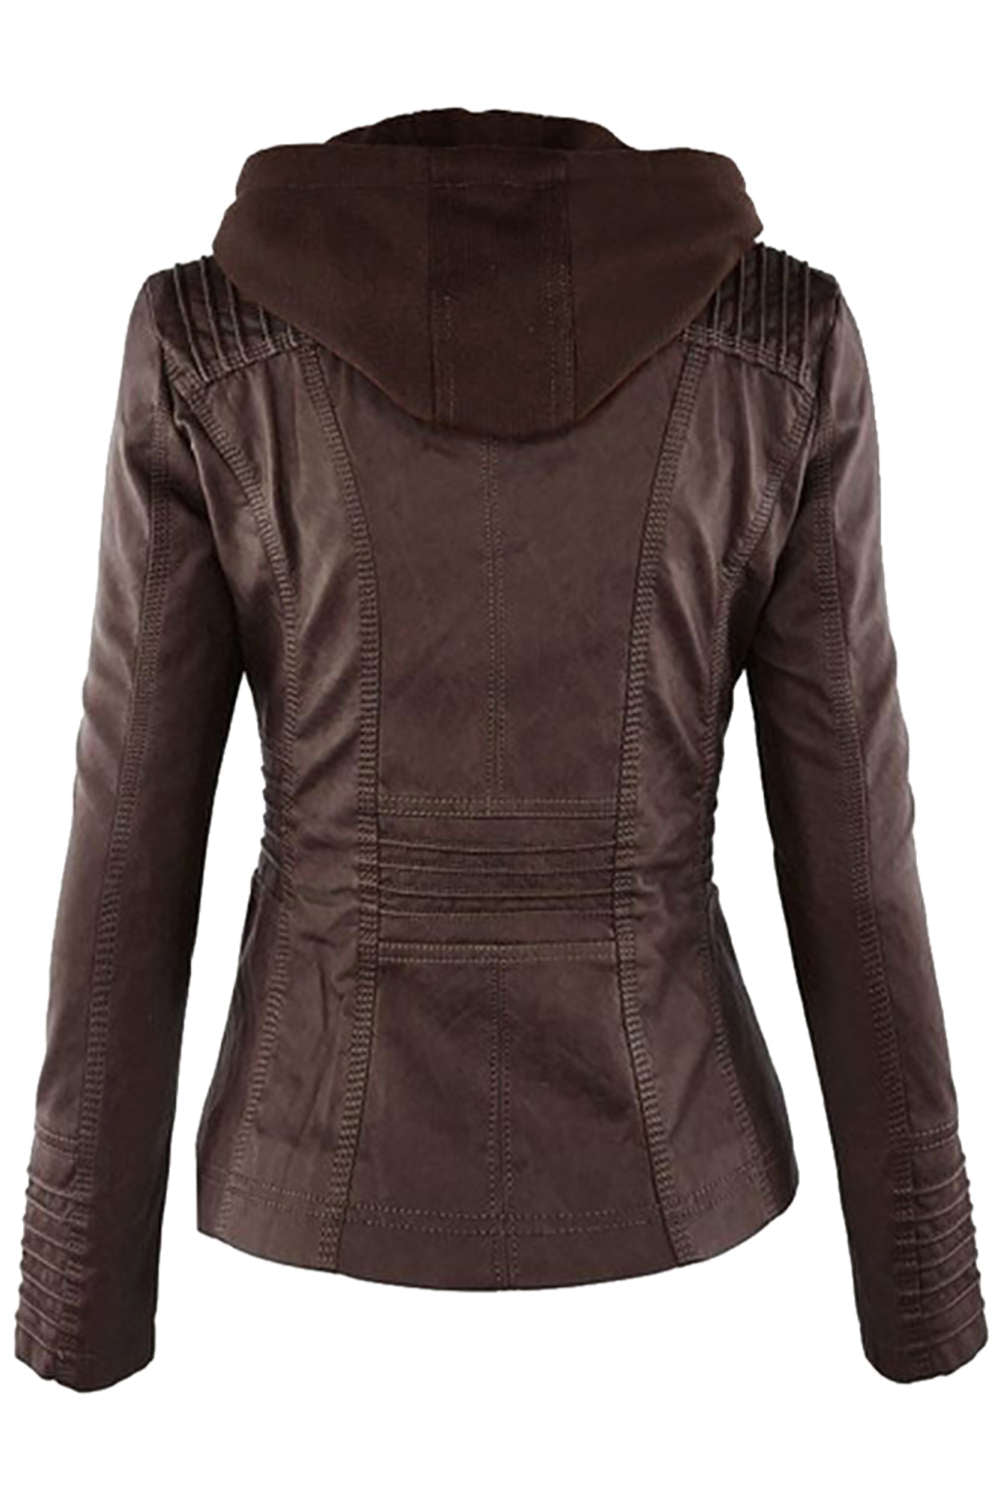 Iyasson Women's  Faux Leather Zip Up Hooded Jacket